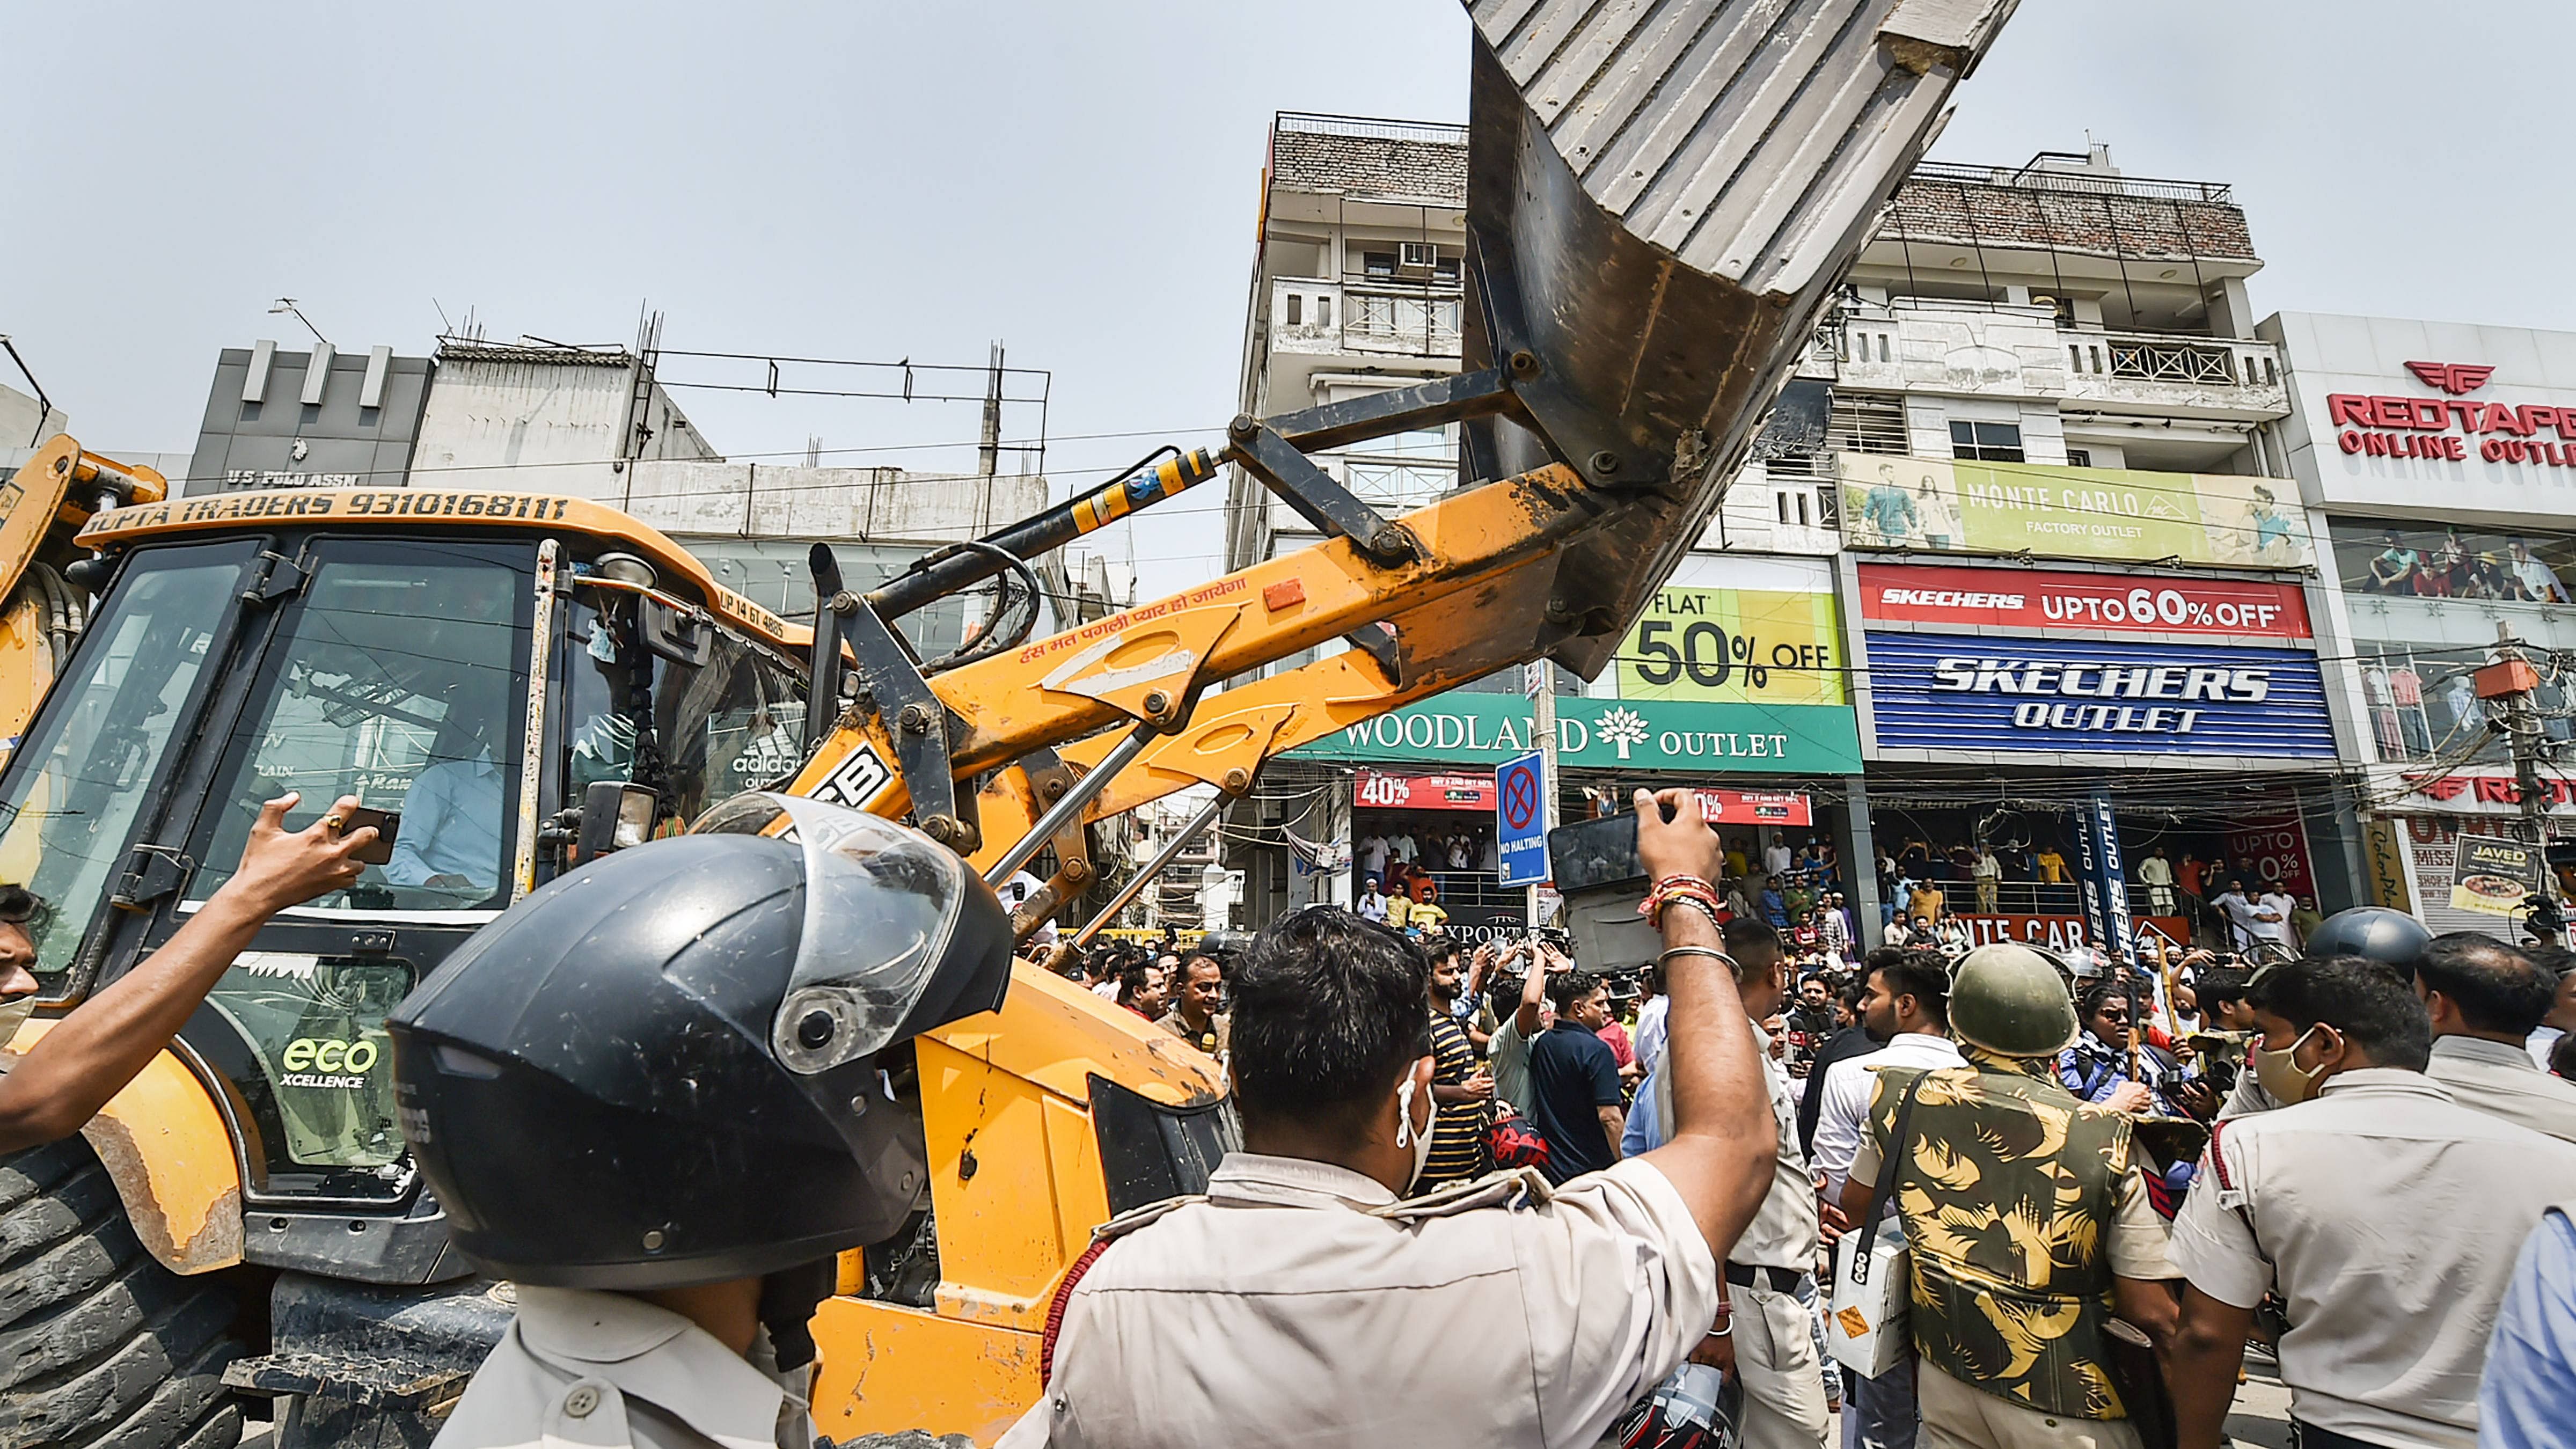 Municipal Corporation of Delhi (MCD) workers in presence of Delhi Police during an anti-encroachment drive, at Shaheen Bagh area. Credit: PTI file Photo